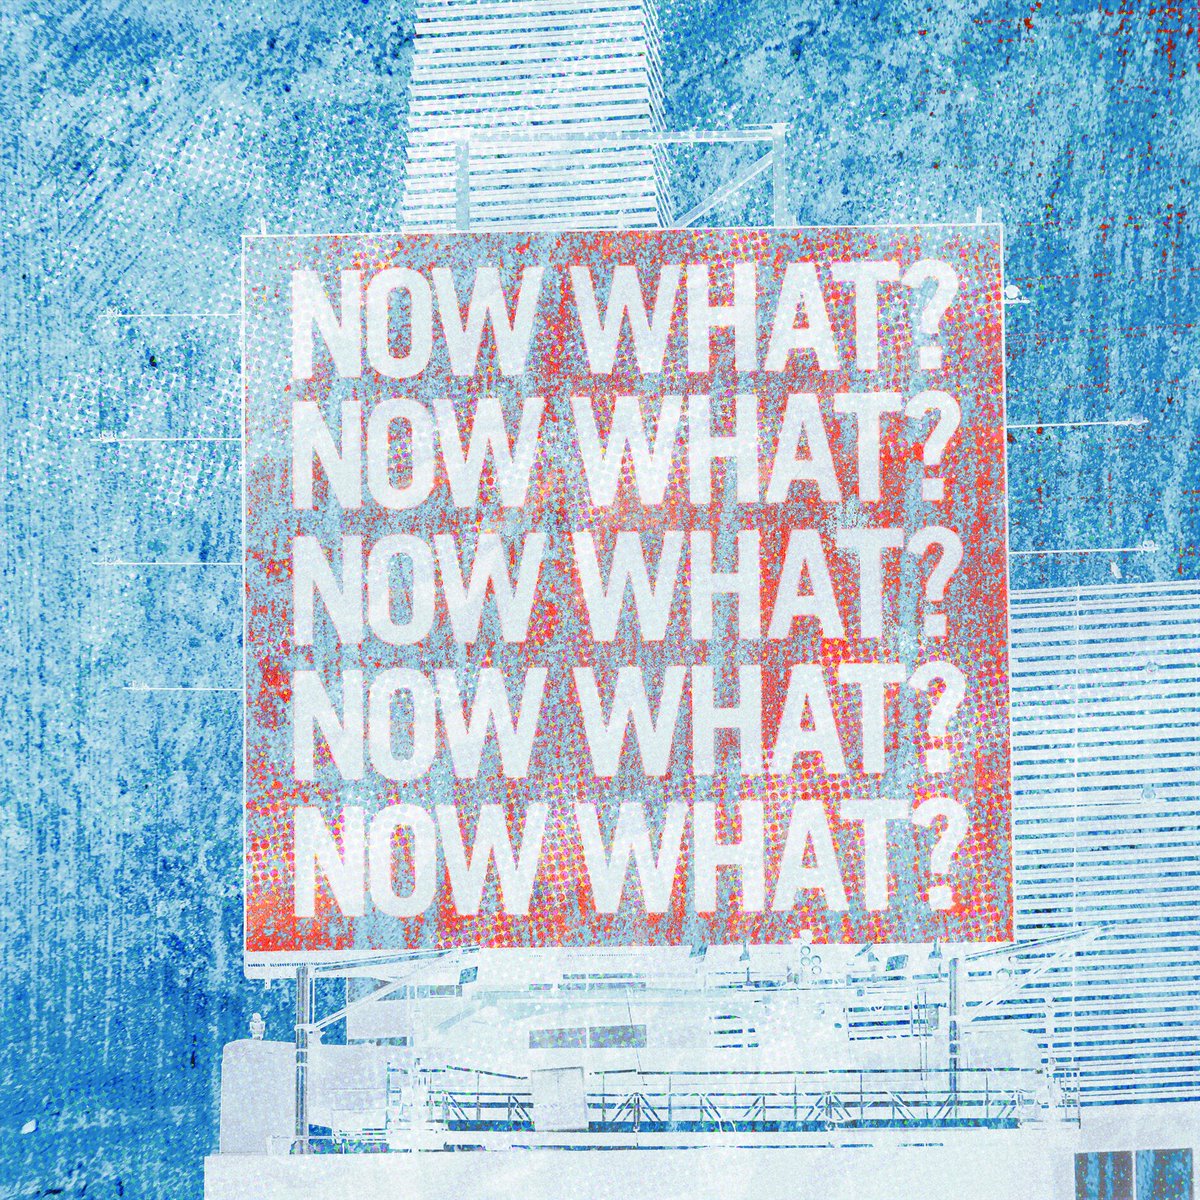 Now What? - 2024

This was one of my older designs and works that I sort of forgot for awhile until going through my folders.

#design #art #designer #graphicdesign #style #artist #photography #artwork #o #d #posterart #albumdesign